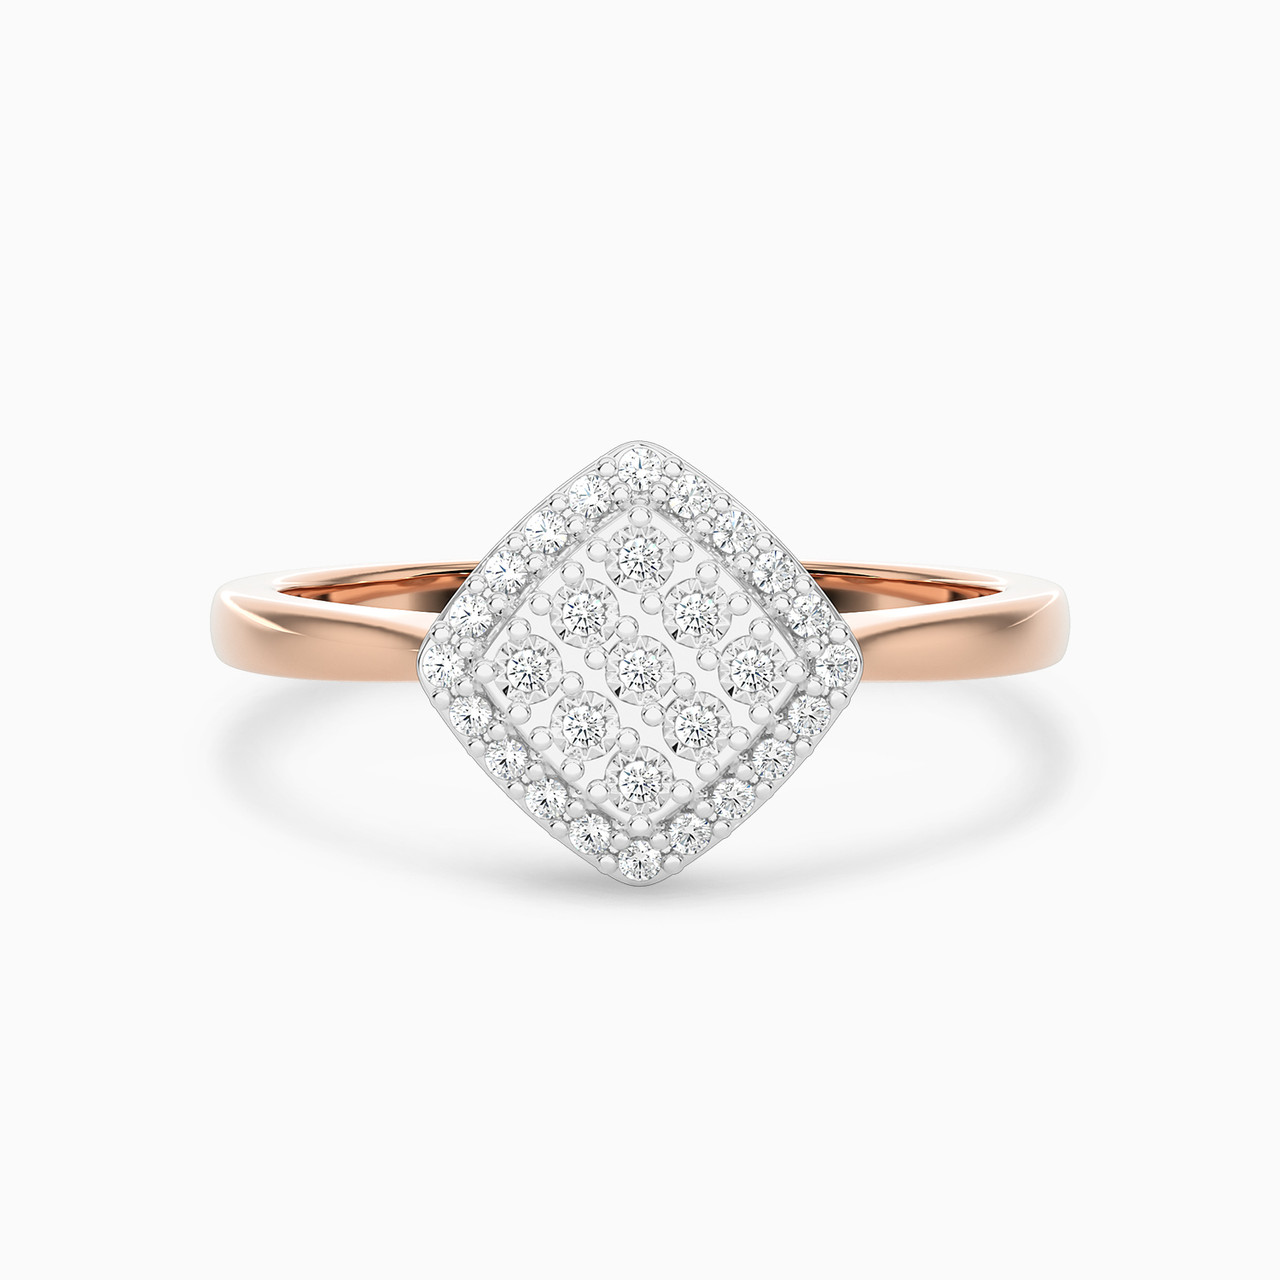 Cushion Shaped Diamond Statement Ring in 18K Gold 